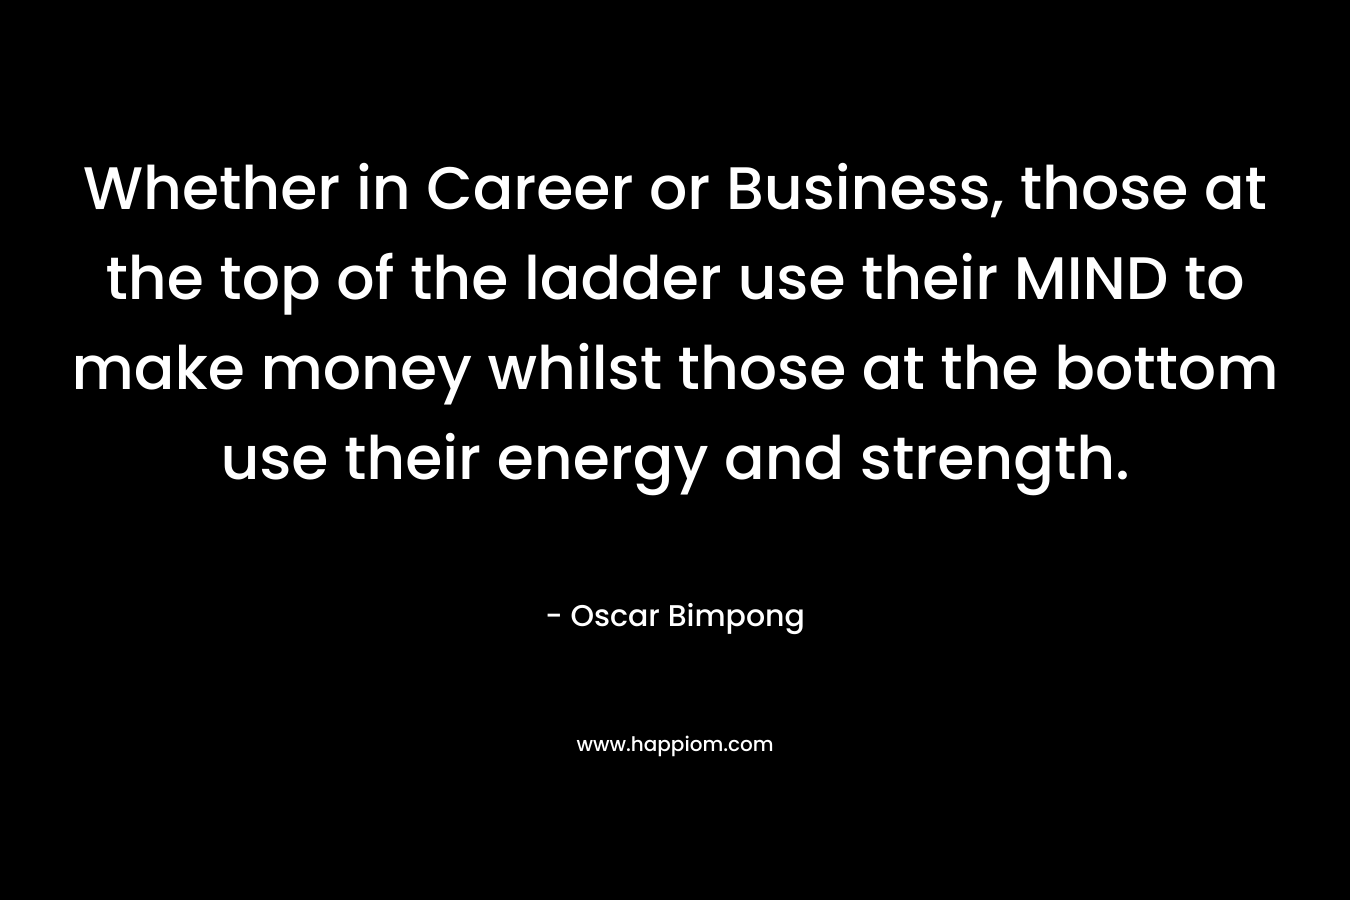 Whether in Career or Business, those at the top of the ladder use their MIND to make money whilst those at the bottom use their energy and strength. – Oscar Bimpong